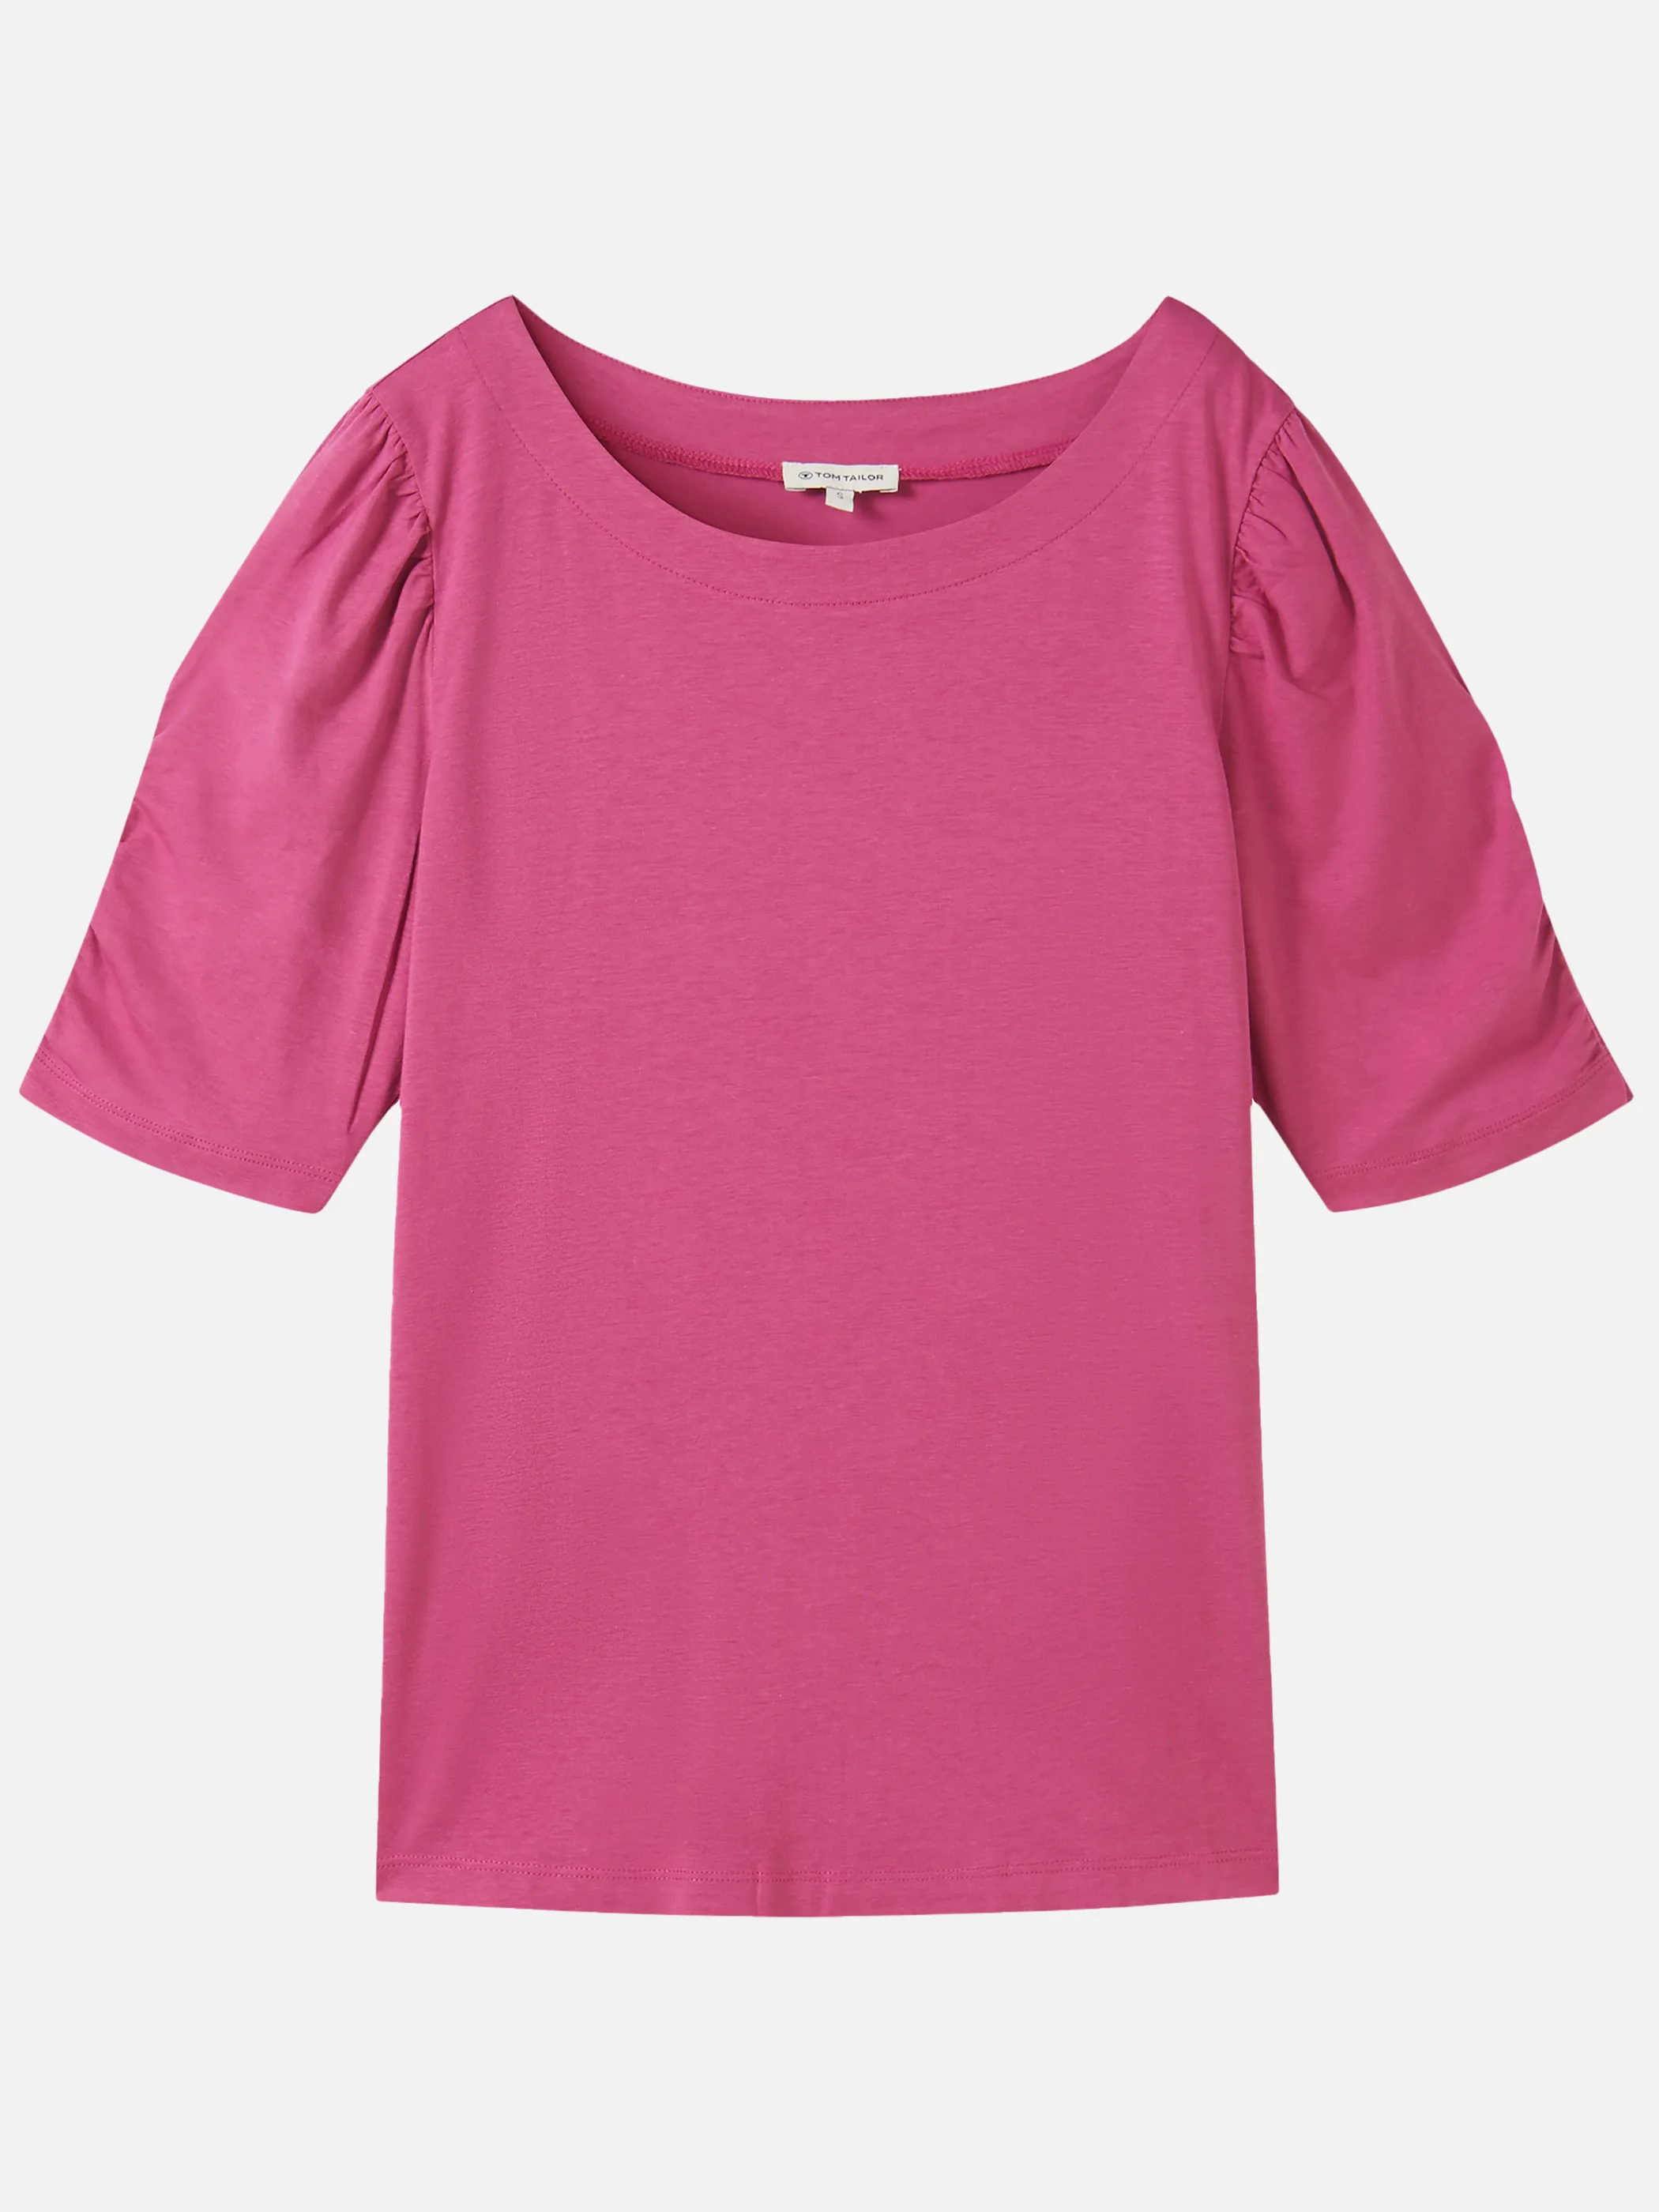 Tom Tailor 1041572 T-shirt gathered sleeve Pink 895787 35275 1